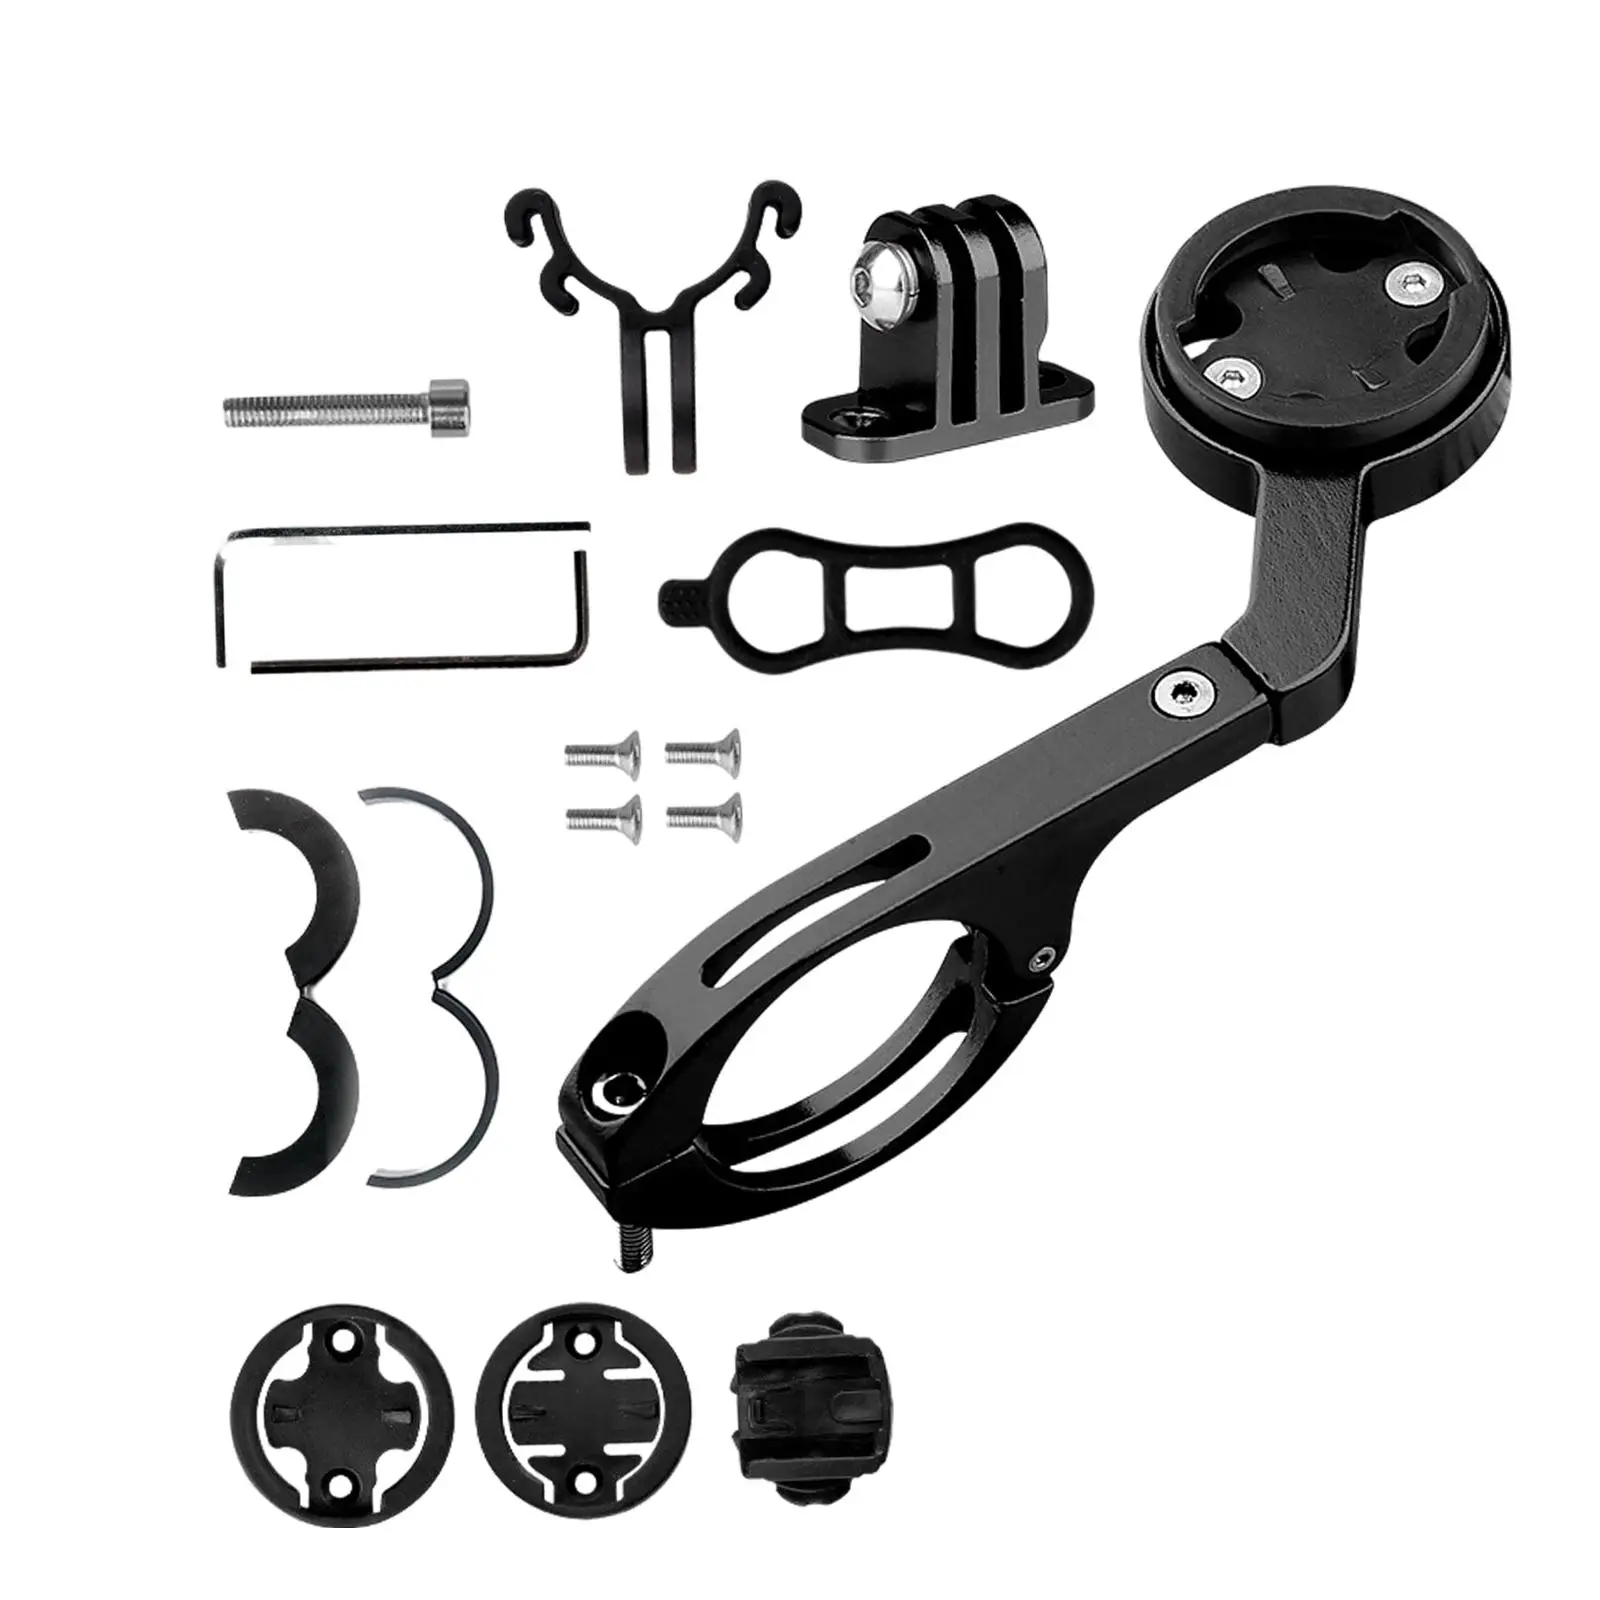  Mount for Bike GPS Computer, Cycling Handlebar Light Holder Camera Bracket  Extended Mount Road  Accessories